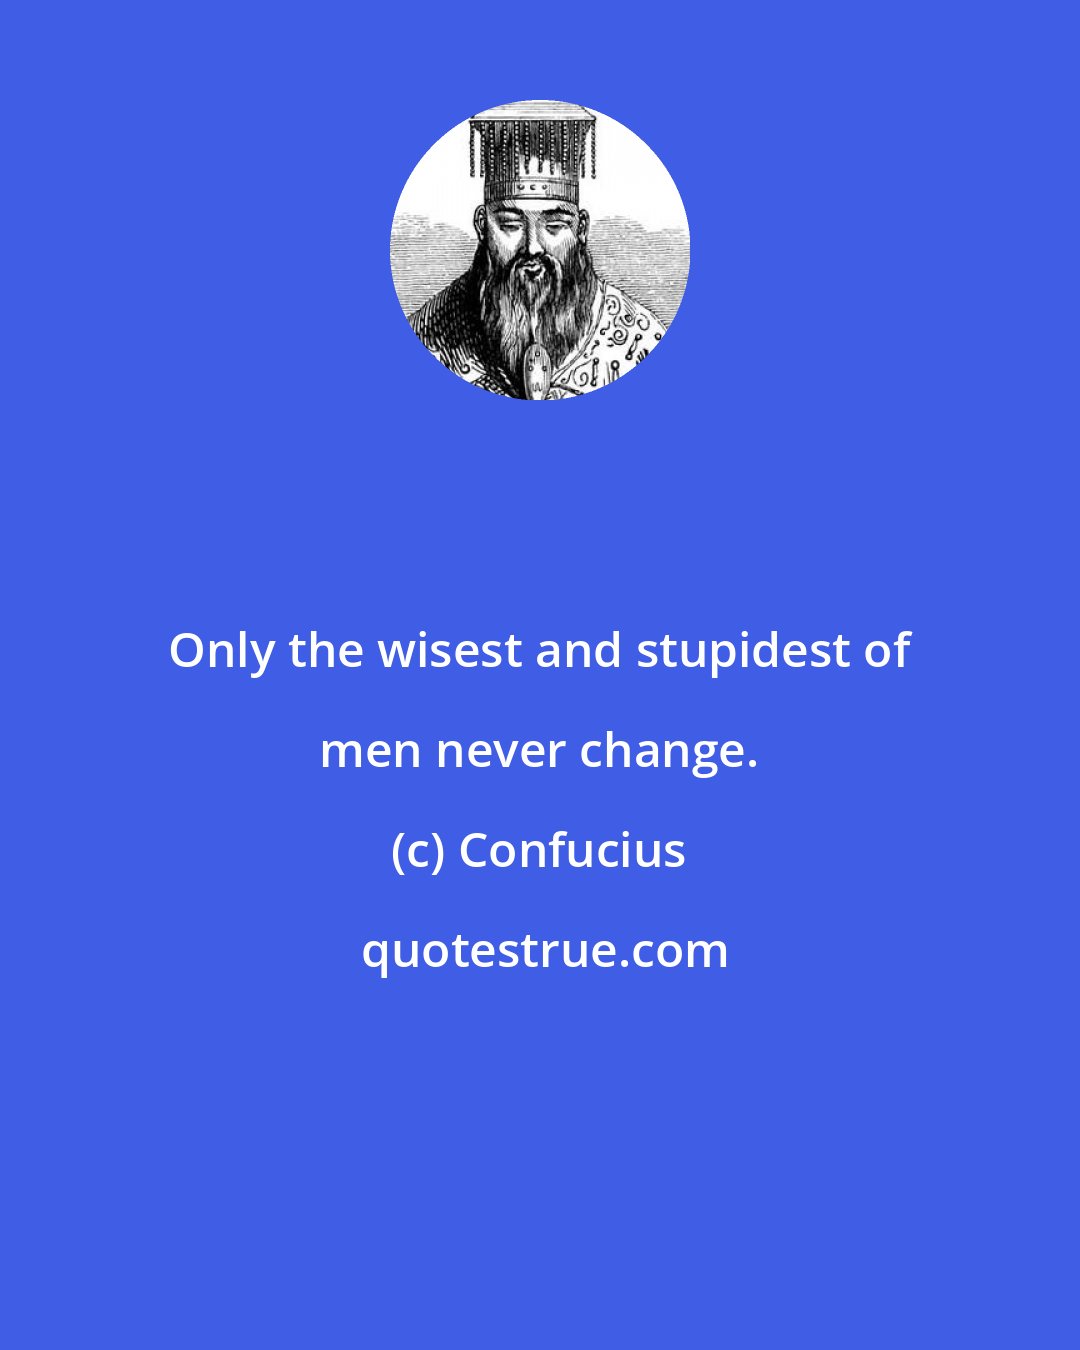 Confucius: Only the wisest and stupidest of men never change.